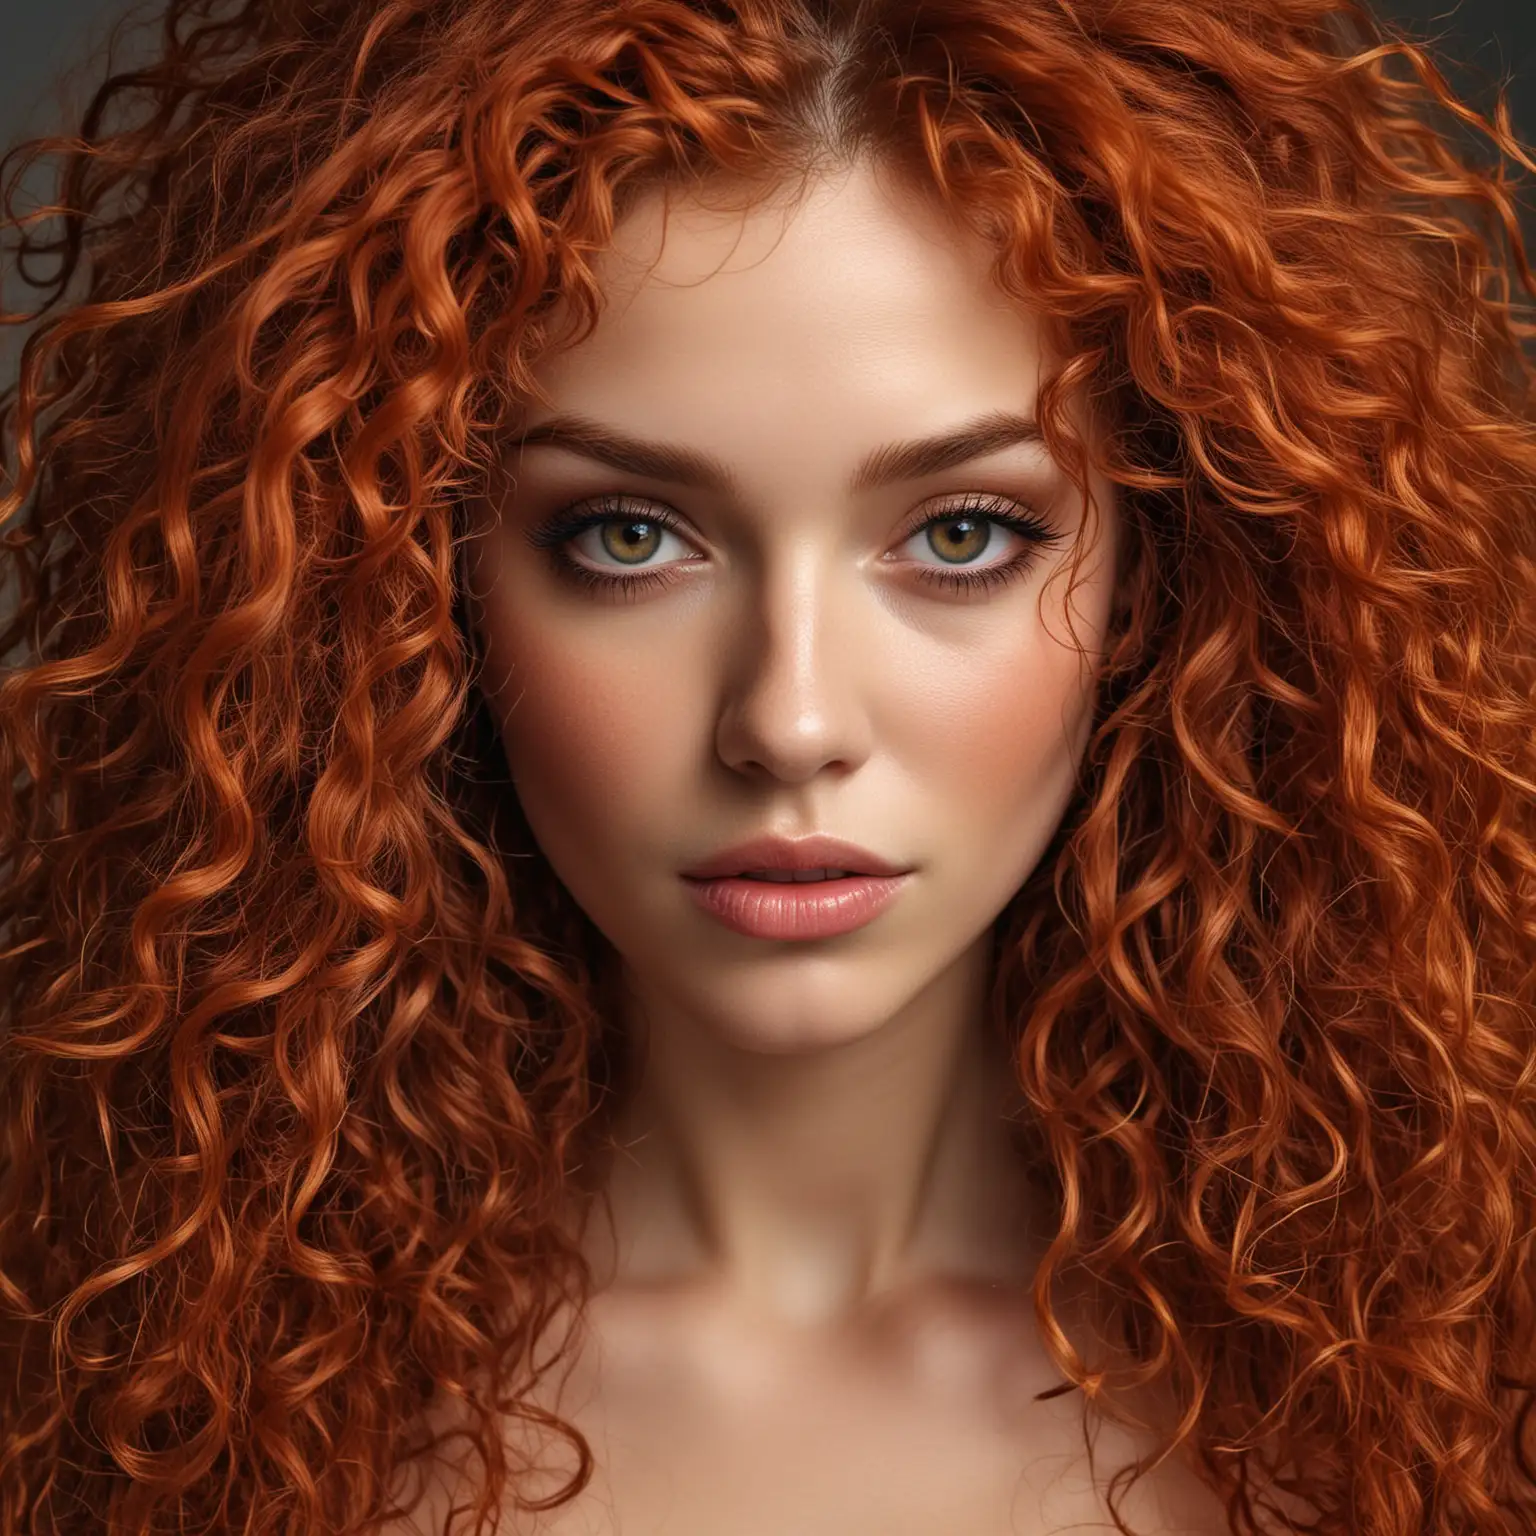 Captivating Woman with Wild Red Curly Hair and Intense Eyes